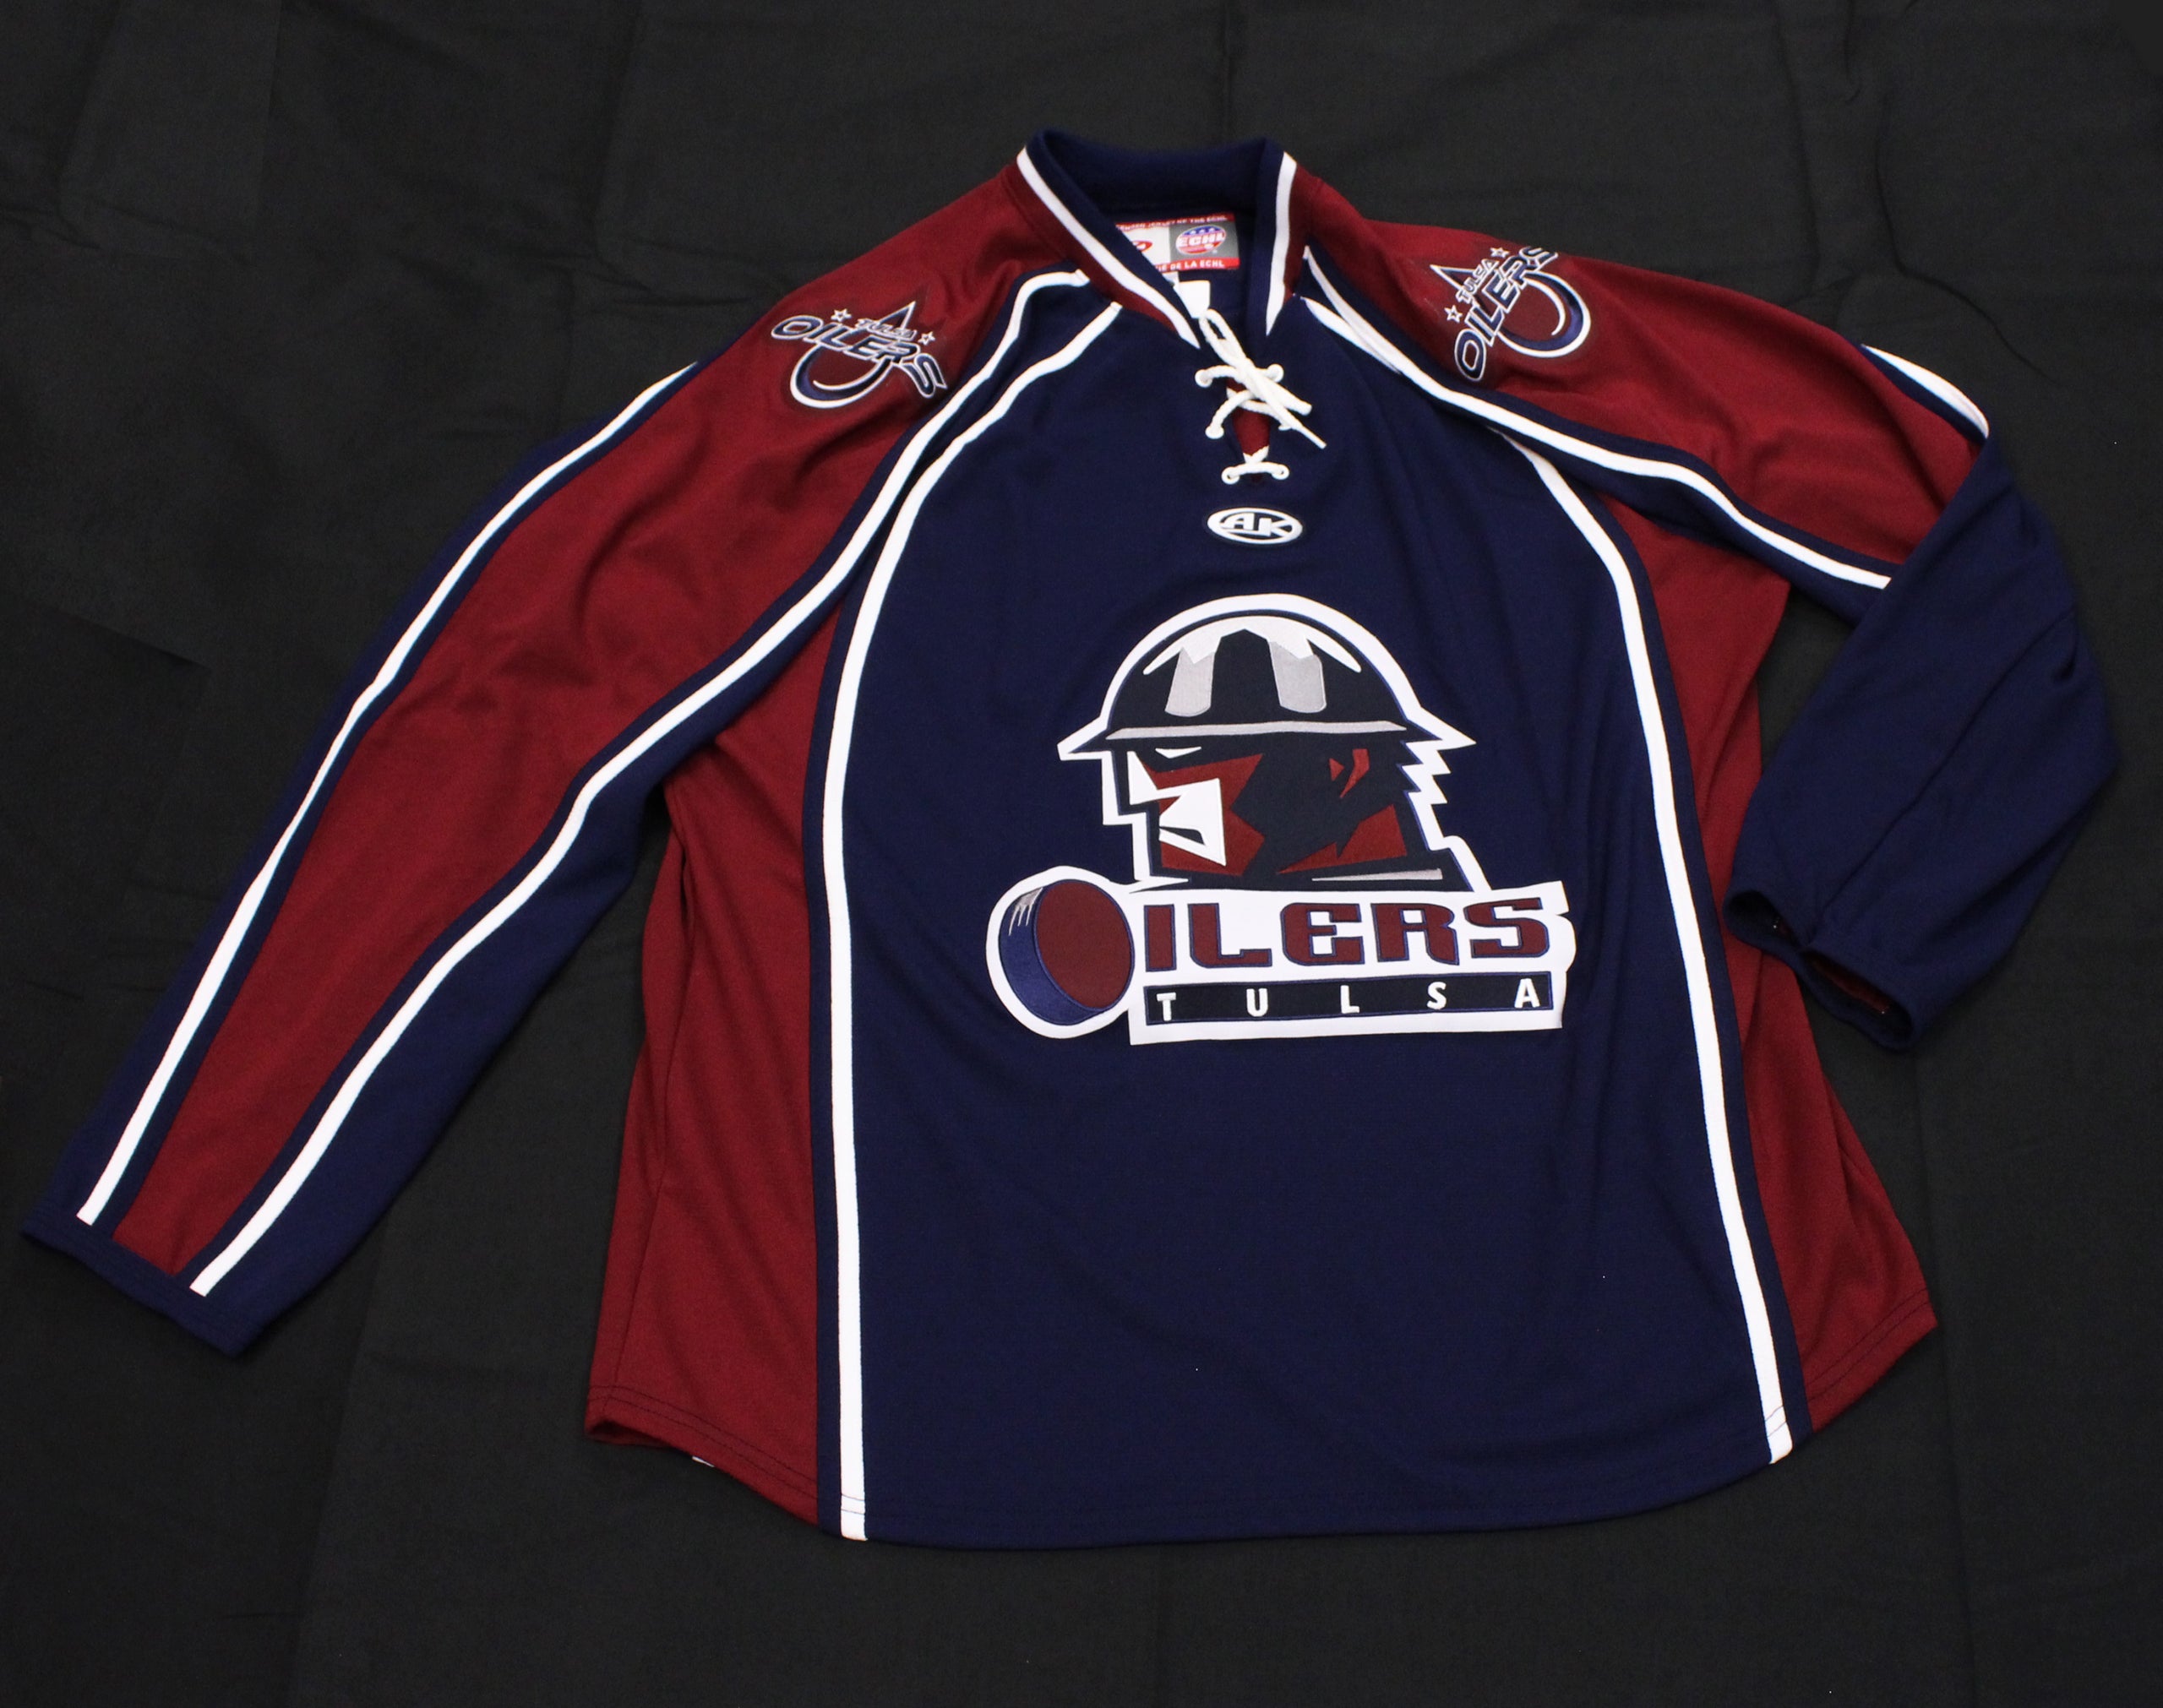 How I accidentally designed an ECHL (Tulsa Oilers) jersey. : r